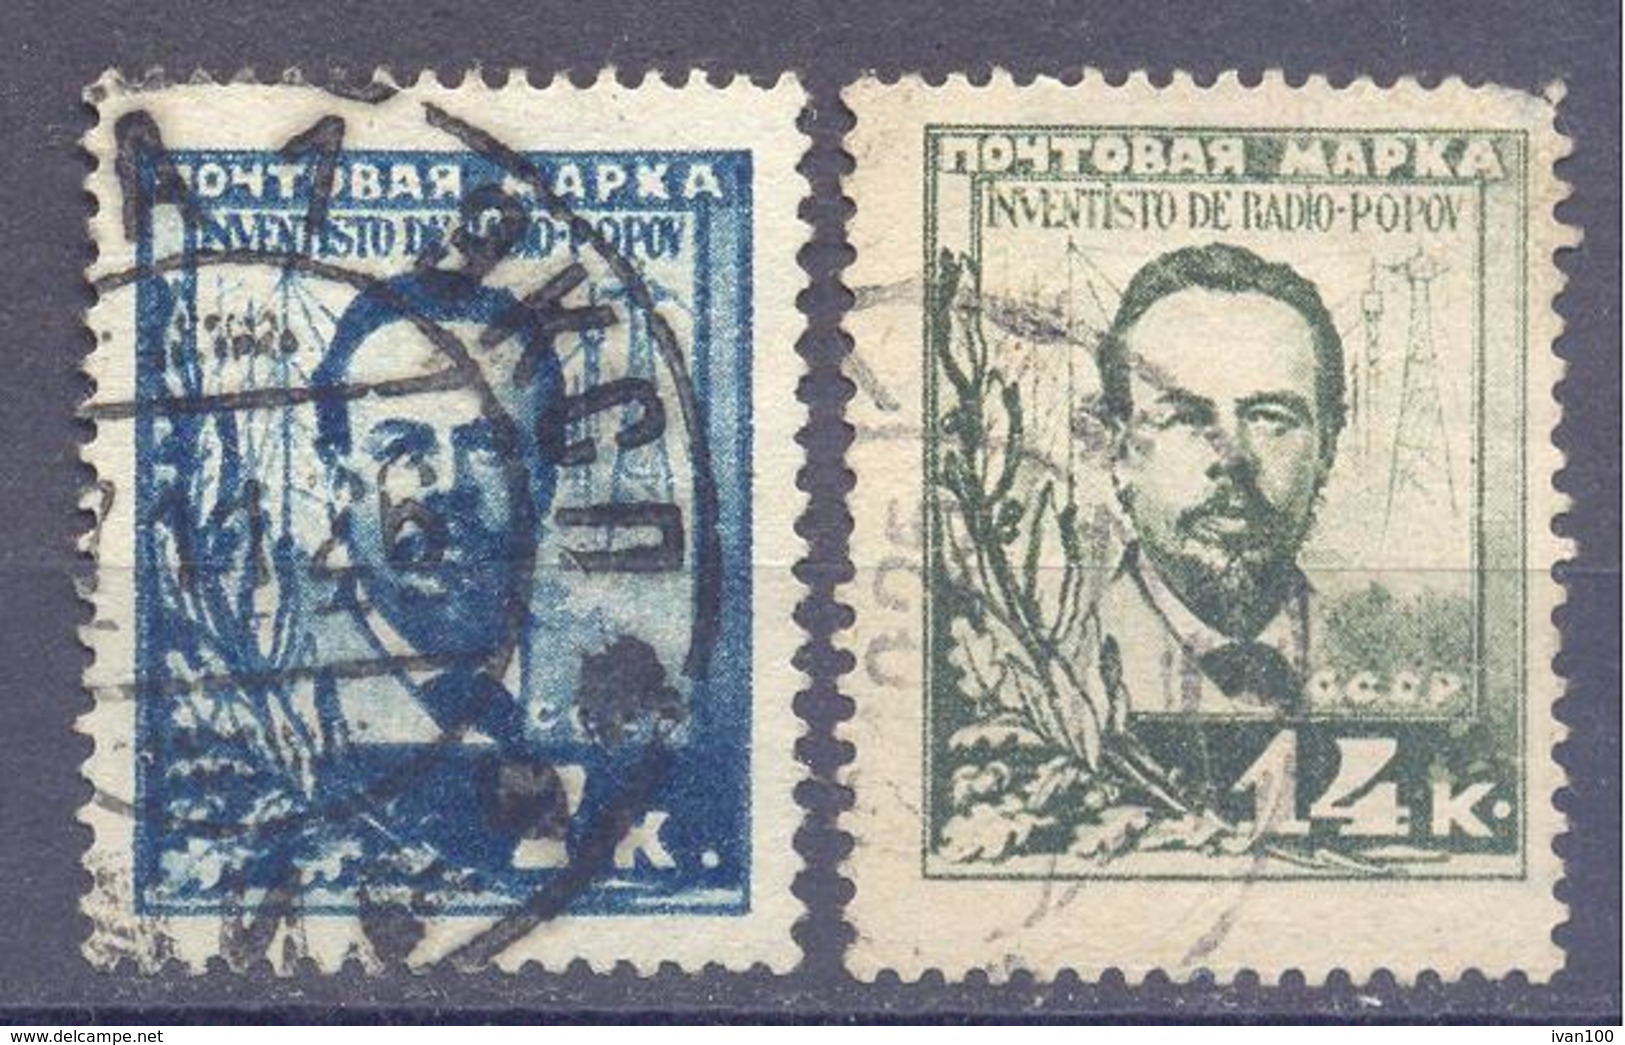 1925. USSR/Russia, 30y Of Popov's Radio Discovery, Mich.301/02, 2v,  Used Without Gumm - Used Stamps